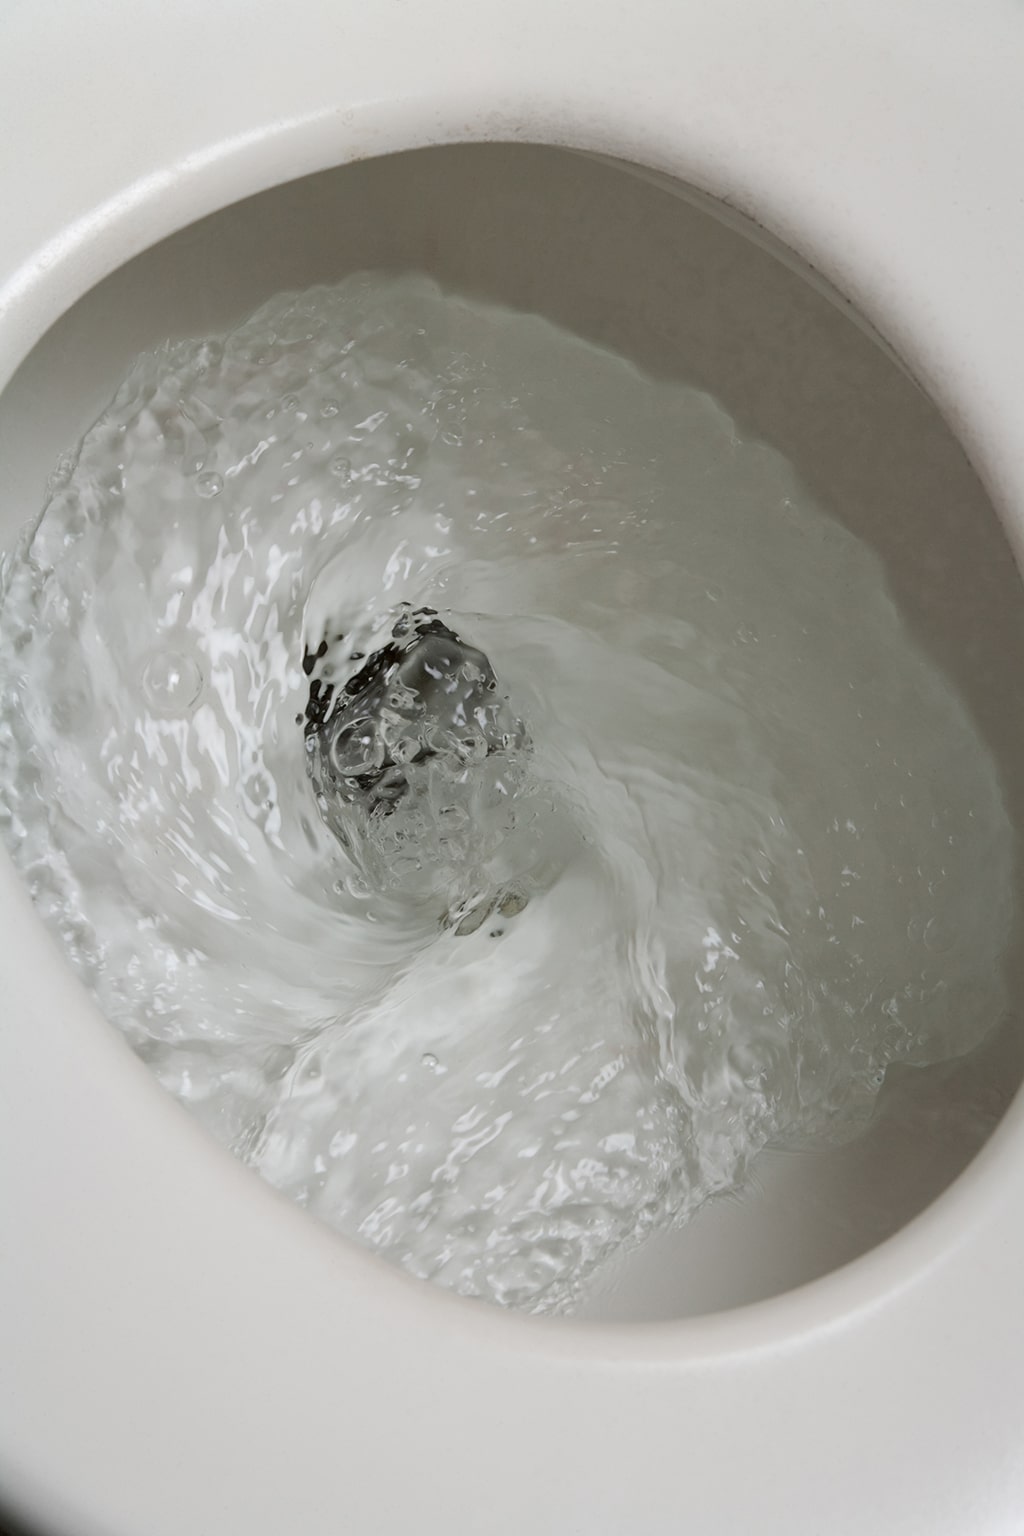 What Are The Most Frequent Causes Your Plumber Diagnoses To Slow Toilet Flushes | Conway, SC